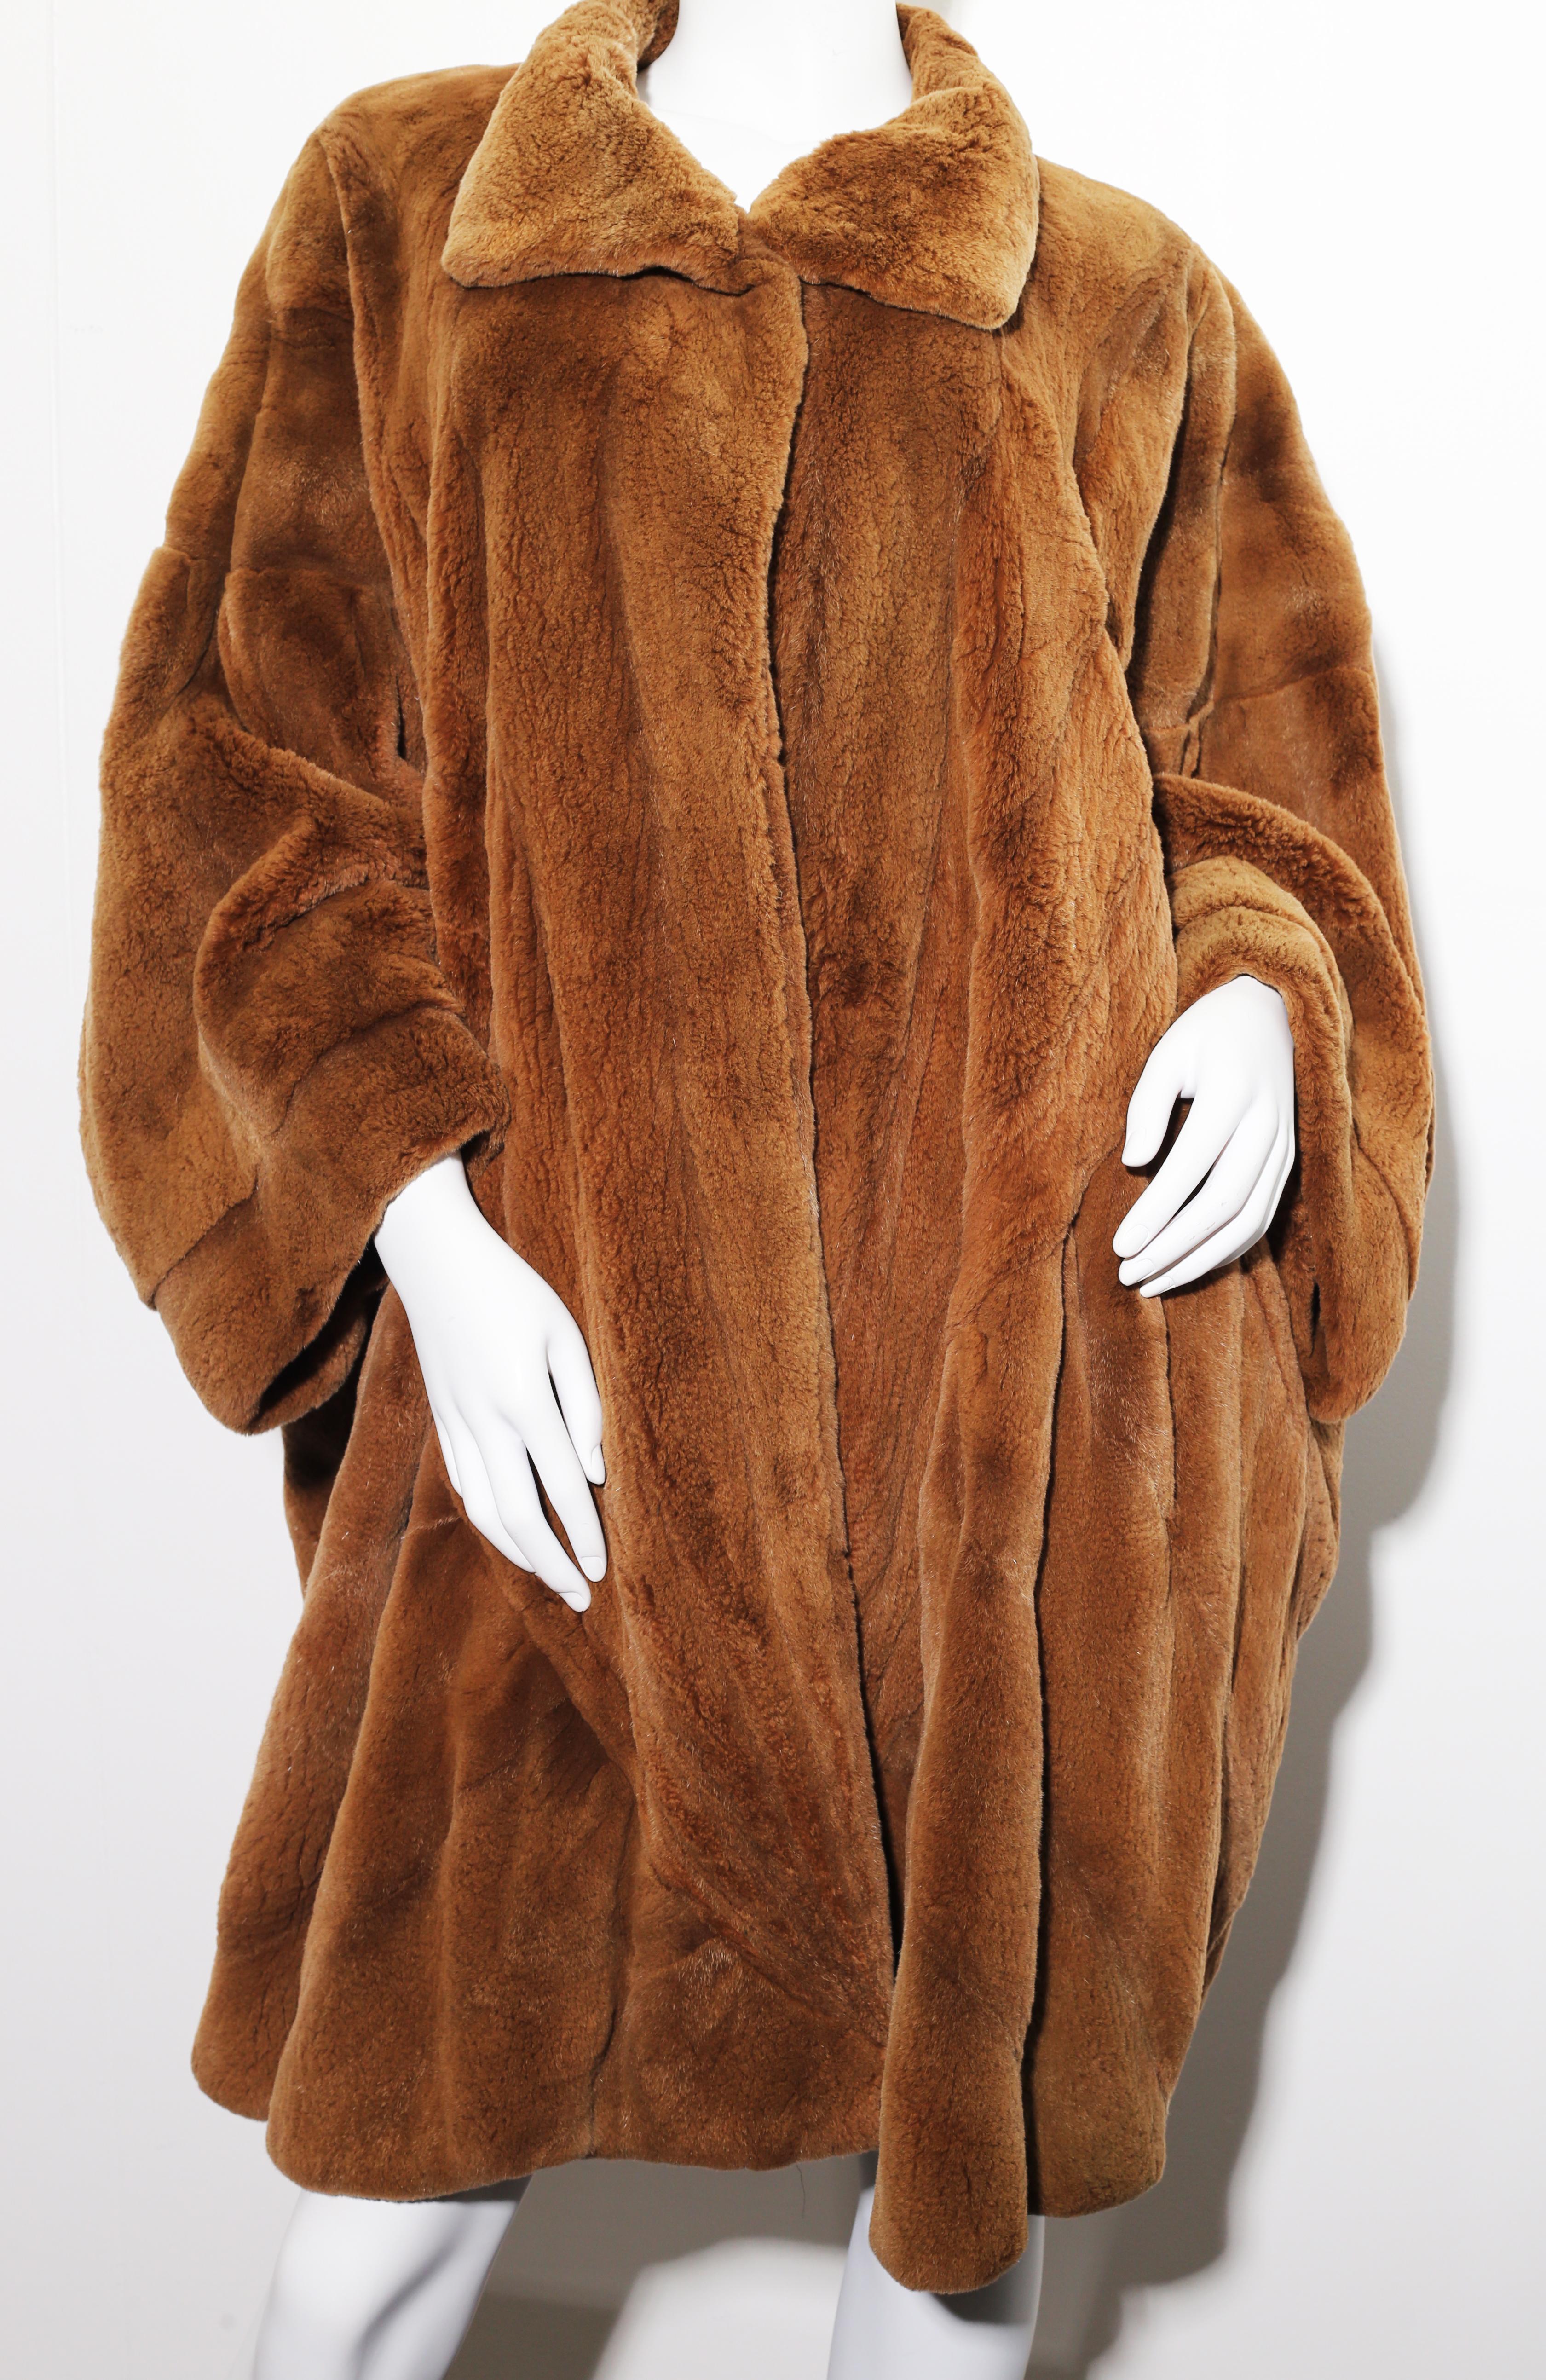 Elena Benarroch Golden sheared mink cape coat, lightweight and versatile, very hugglable

Crafted in Sapin by Fur expert Elena Benarroch Falling to the knees high and elegantly finished with a soft silk interior lining with paisley pattern, 
the